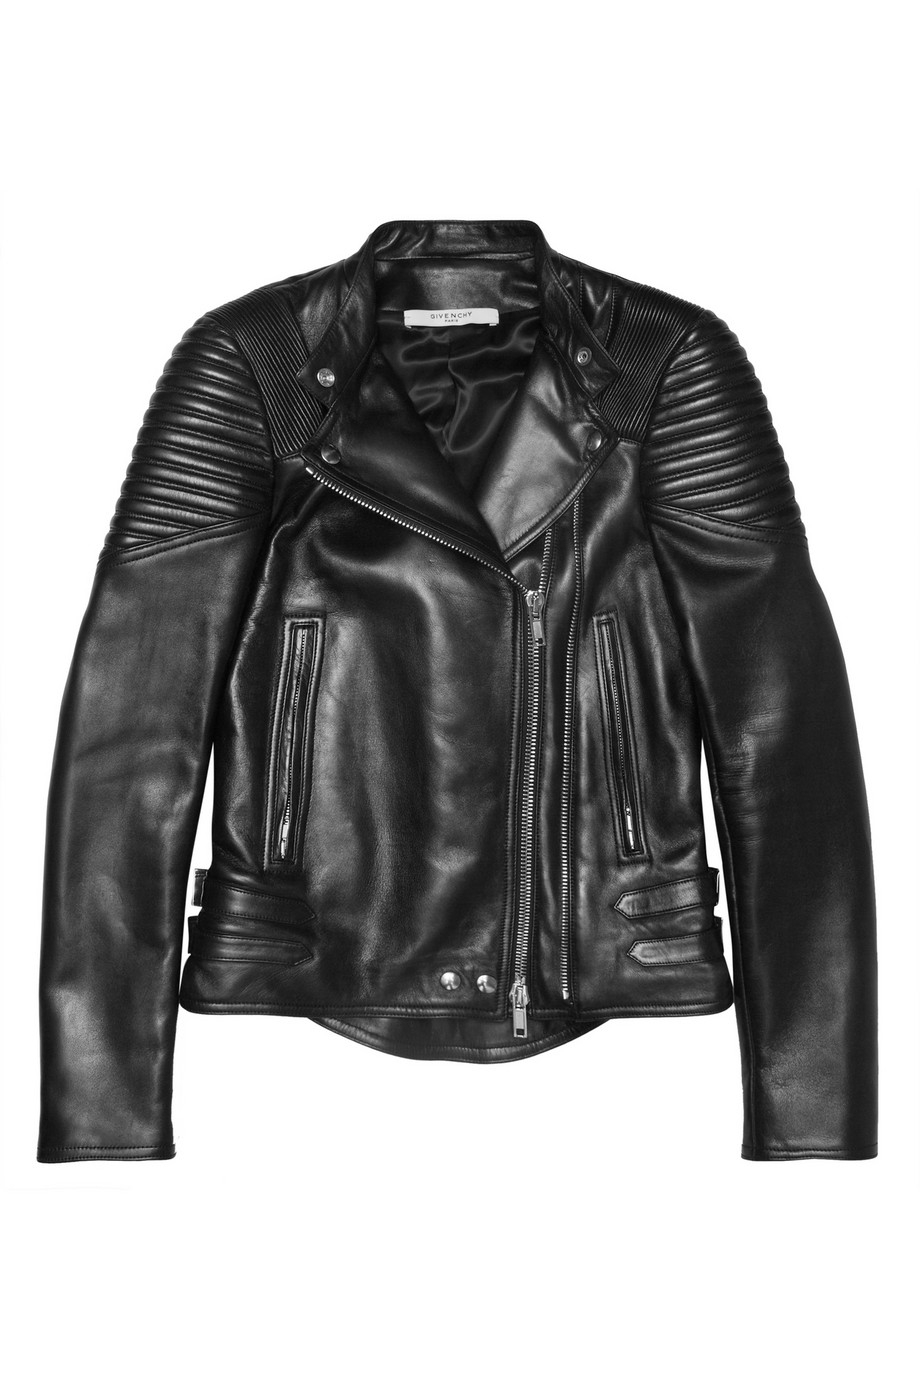 Givenchy Black Leather Biker Jacket With Ribbed Panels in Black | Lyst